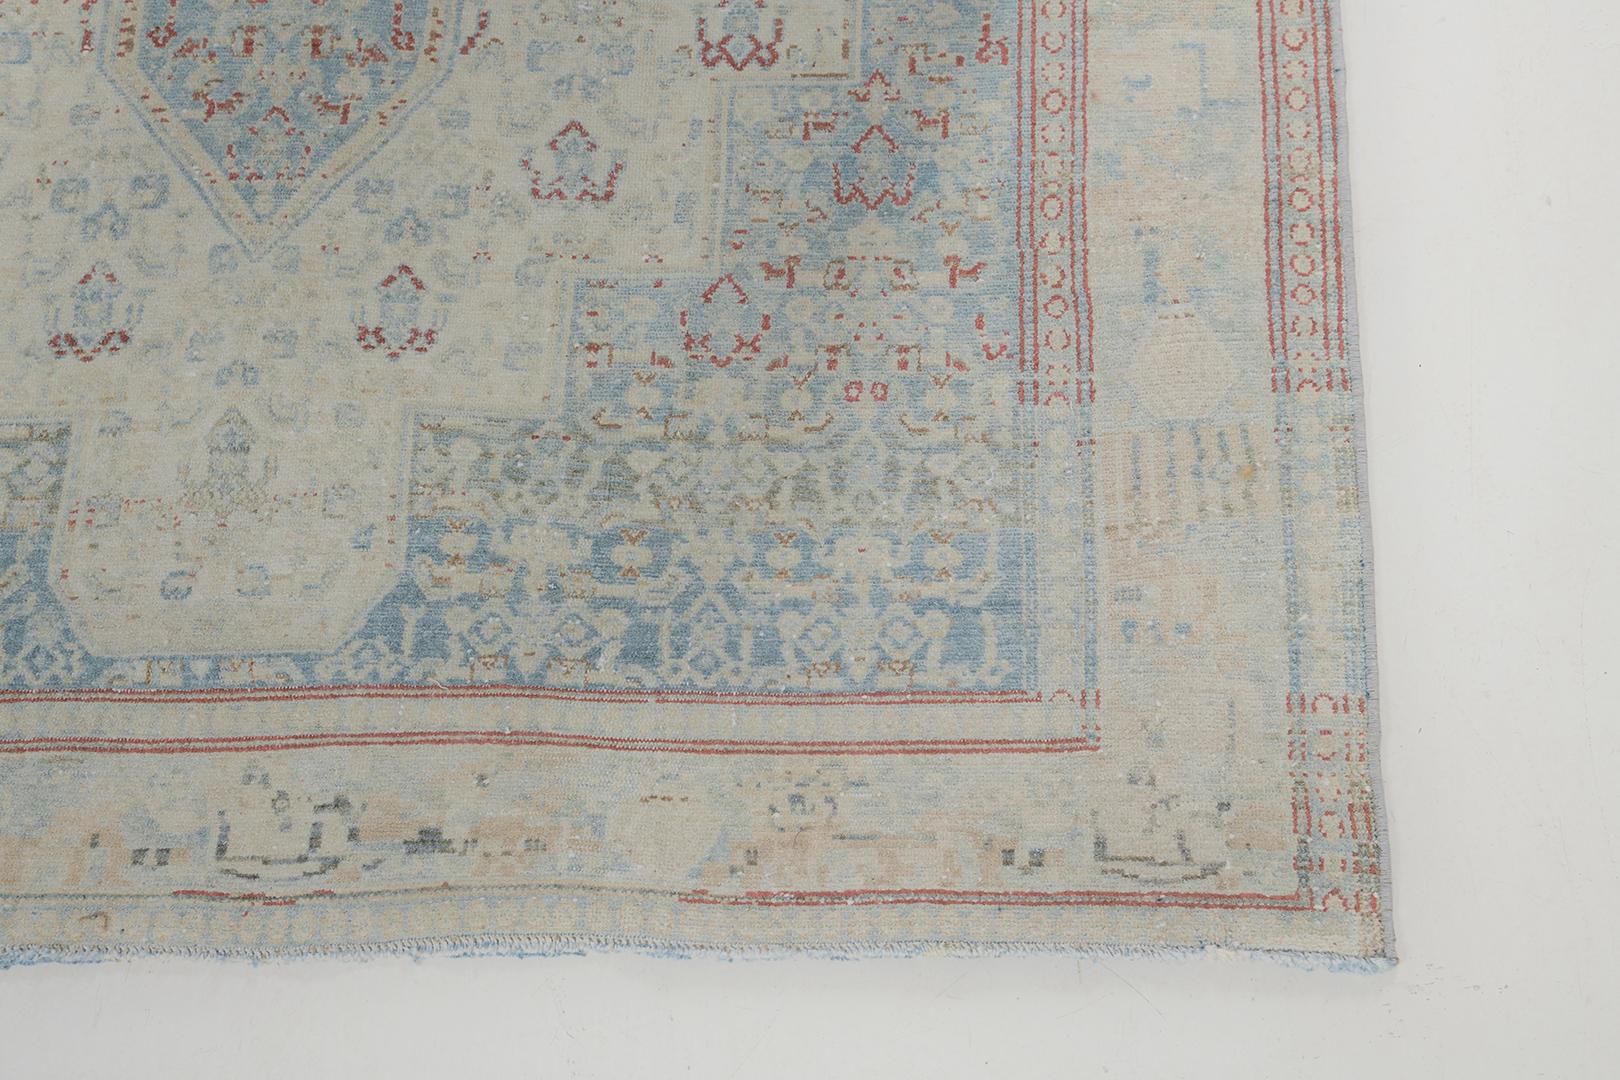 Featuring a phenomenal array of floral forms, leafy tendrils and lush palmettes, this breathtaking Antique Persian Seneh rug. Through the use of muted neutral color scheme of beige, dusty blue and hints of crimson, the embellished dainty floral